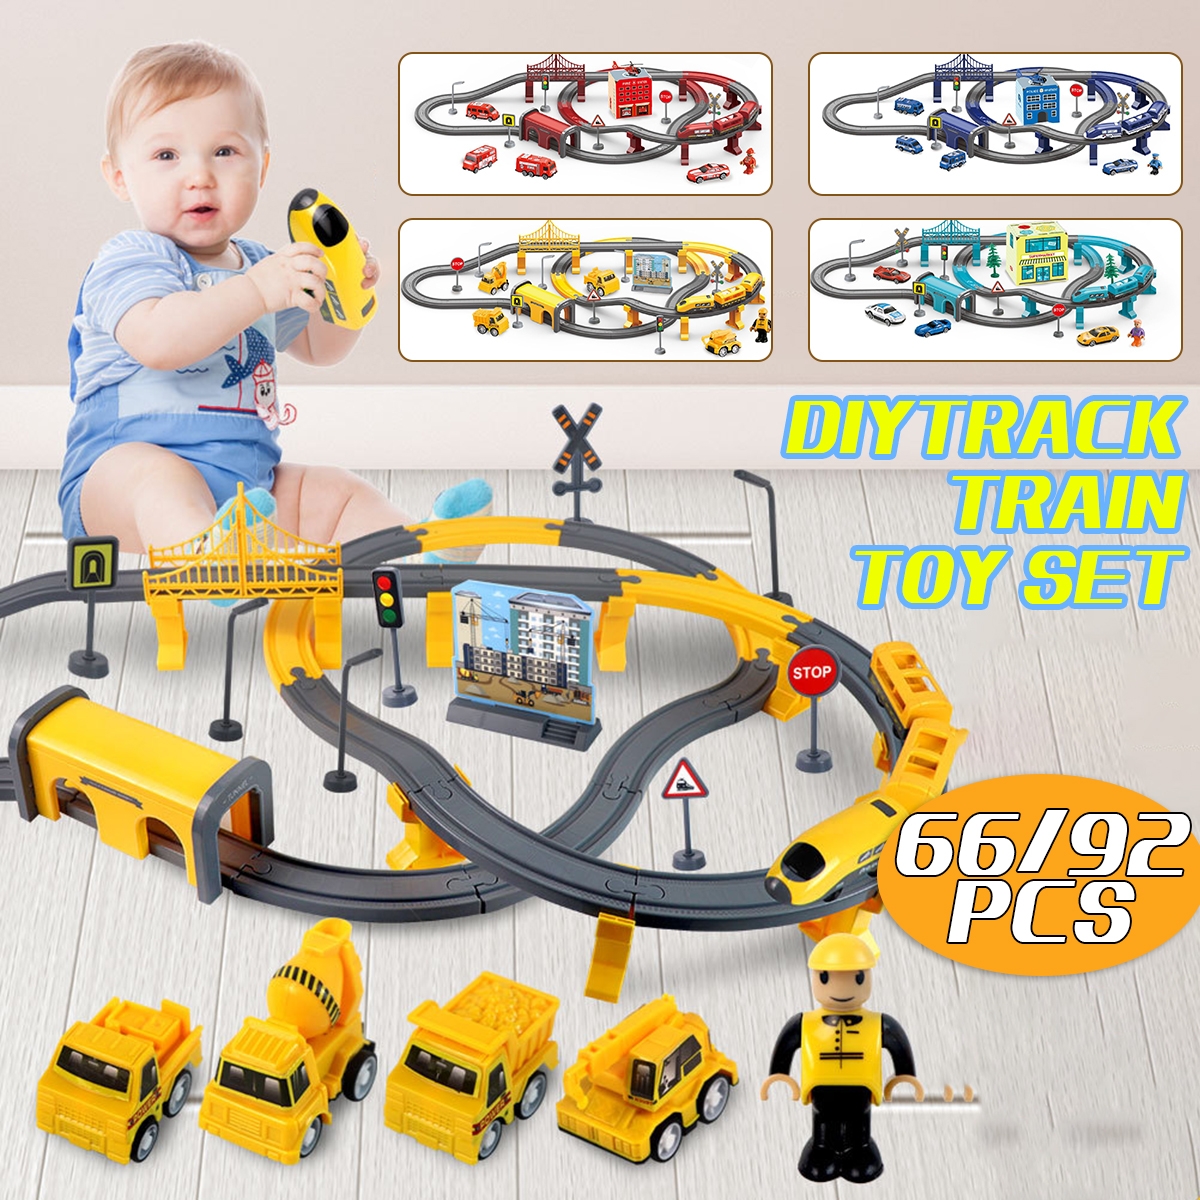 66/92 Pcs Multi-style DIY Assembly Track Train Increase Parent-child Interaction Toy Set with Sound Effect for Kids Gift